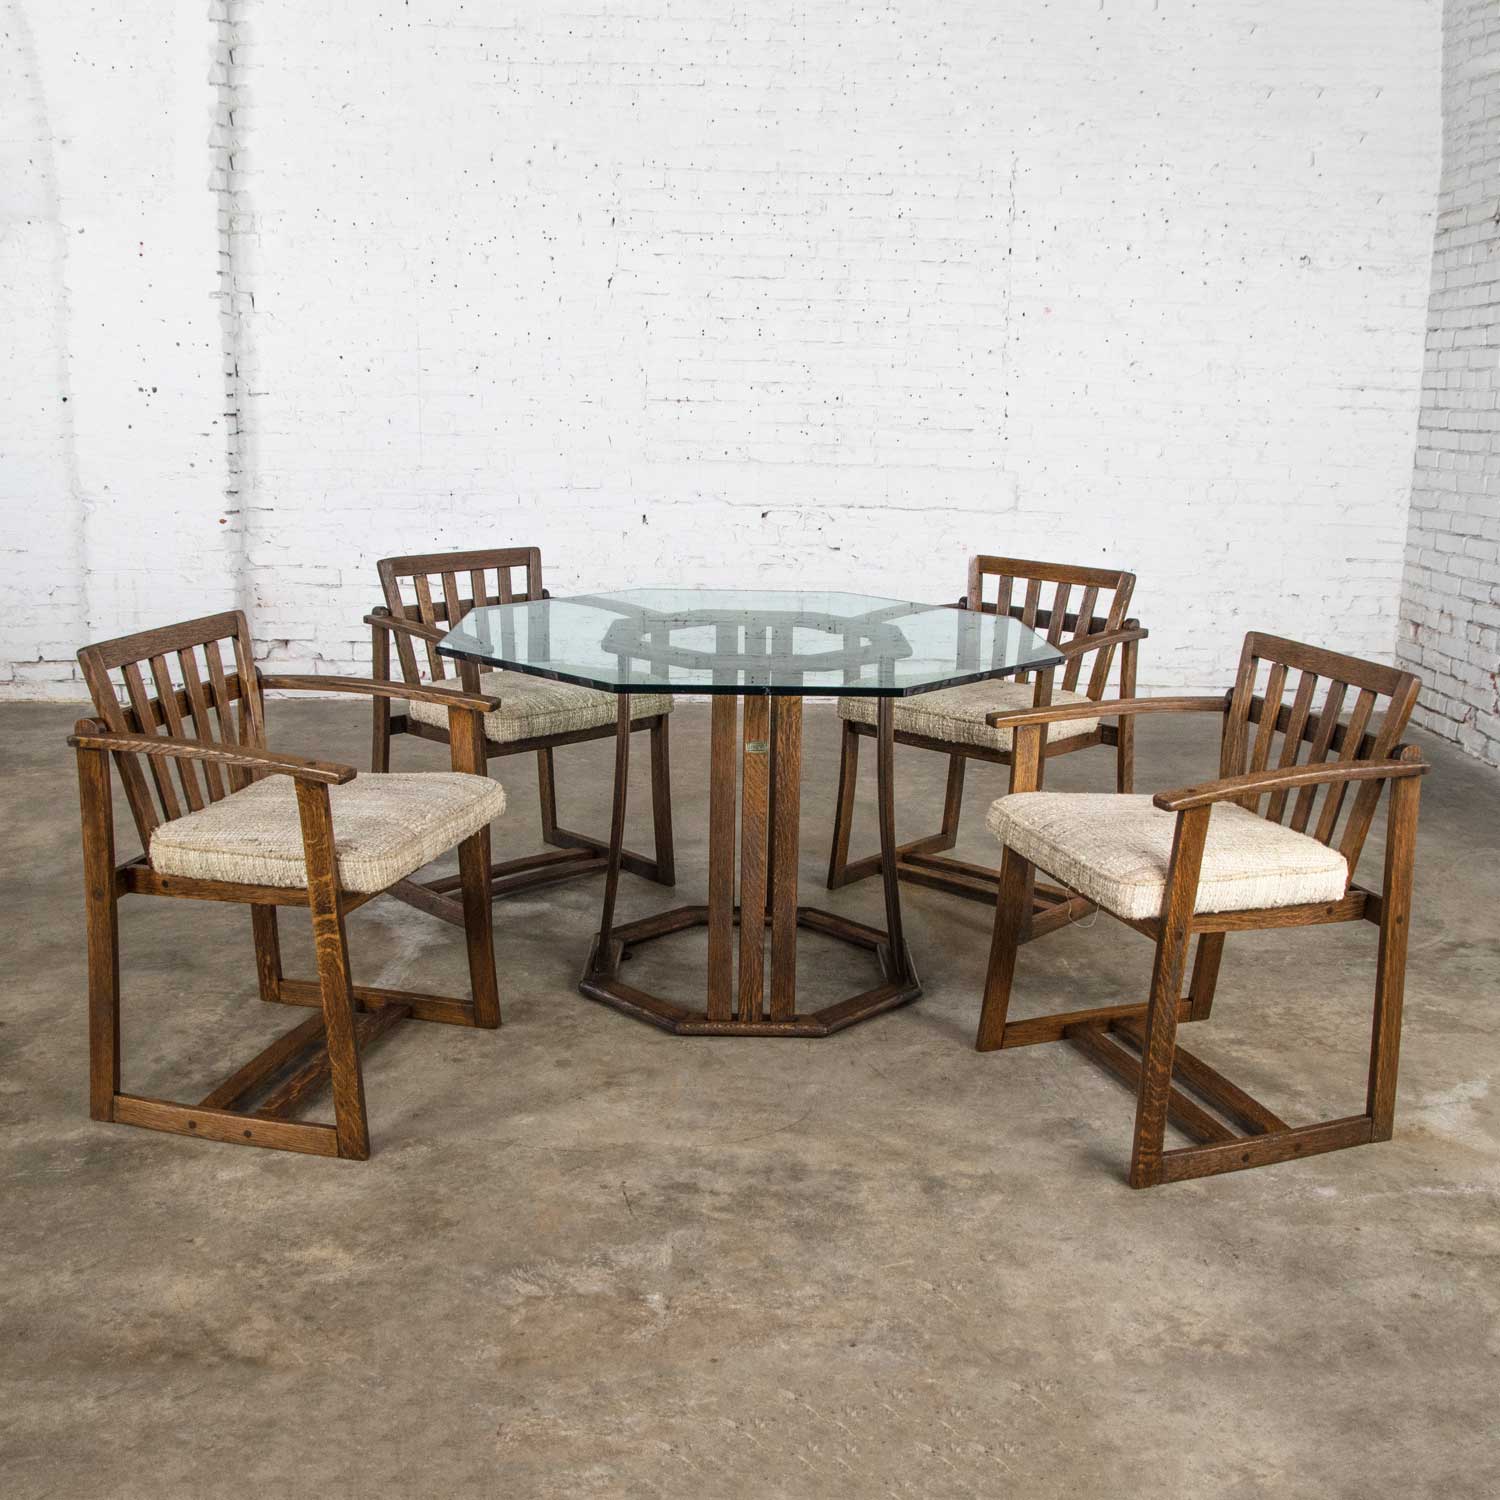 Vintage StavOak Dining Game Table & 4 Chairs from Jack Daniels’ Barrel Staves by Jobie G. Redmond 1981